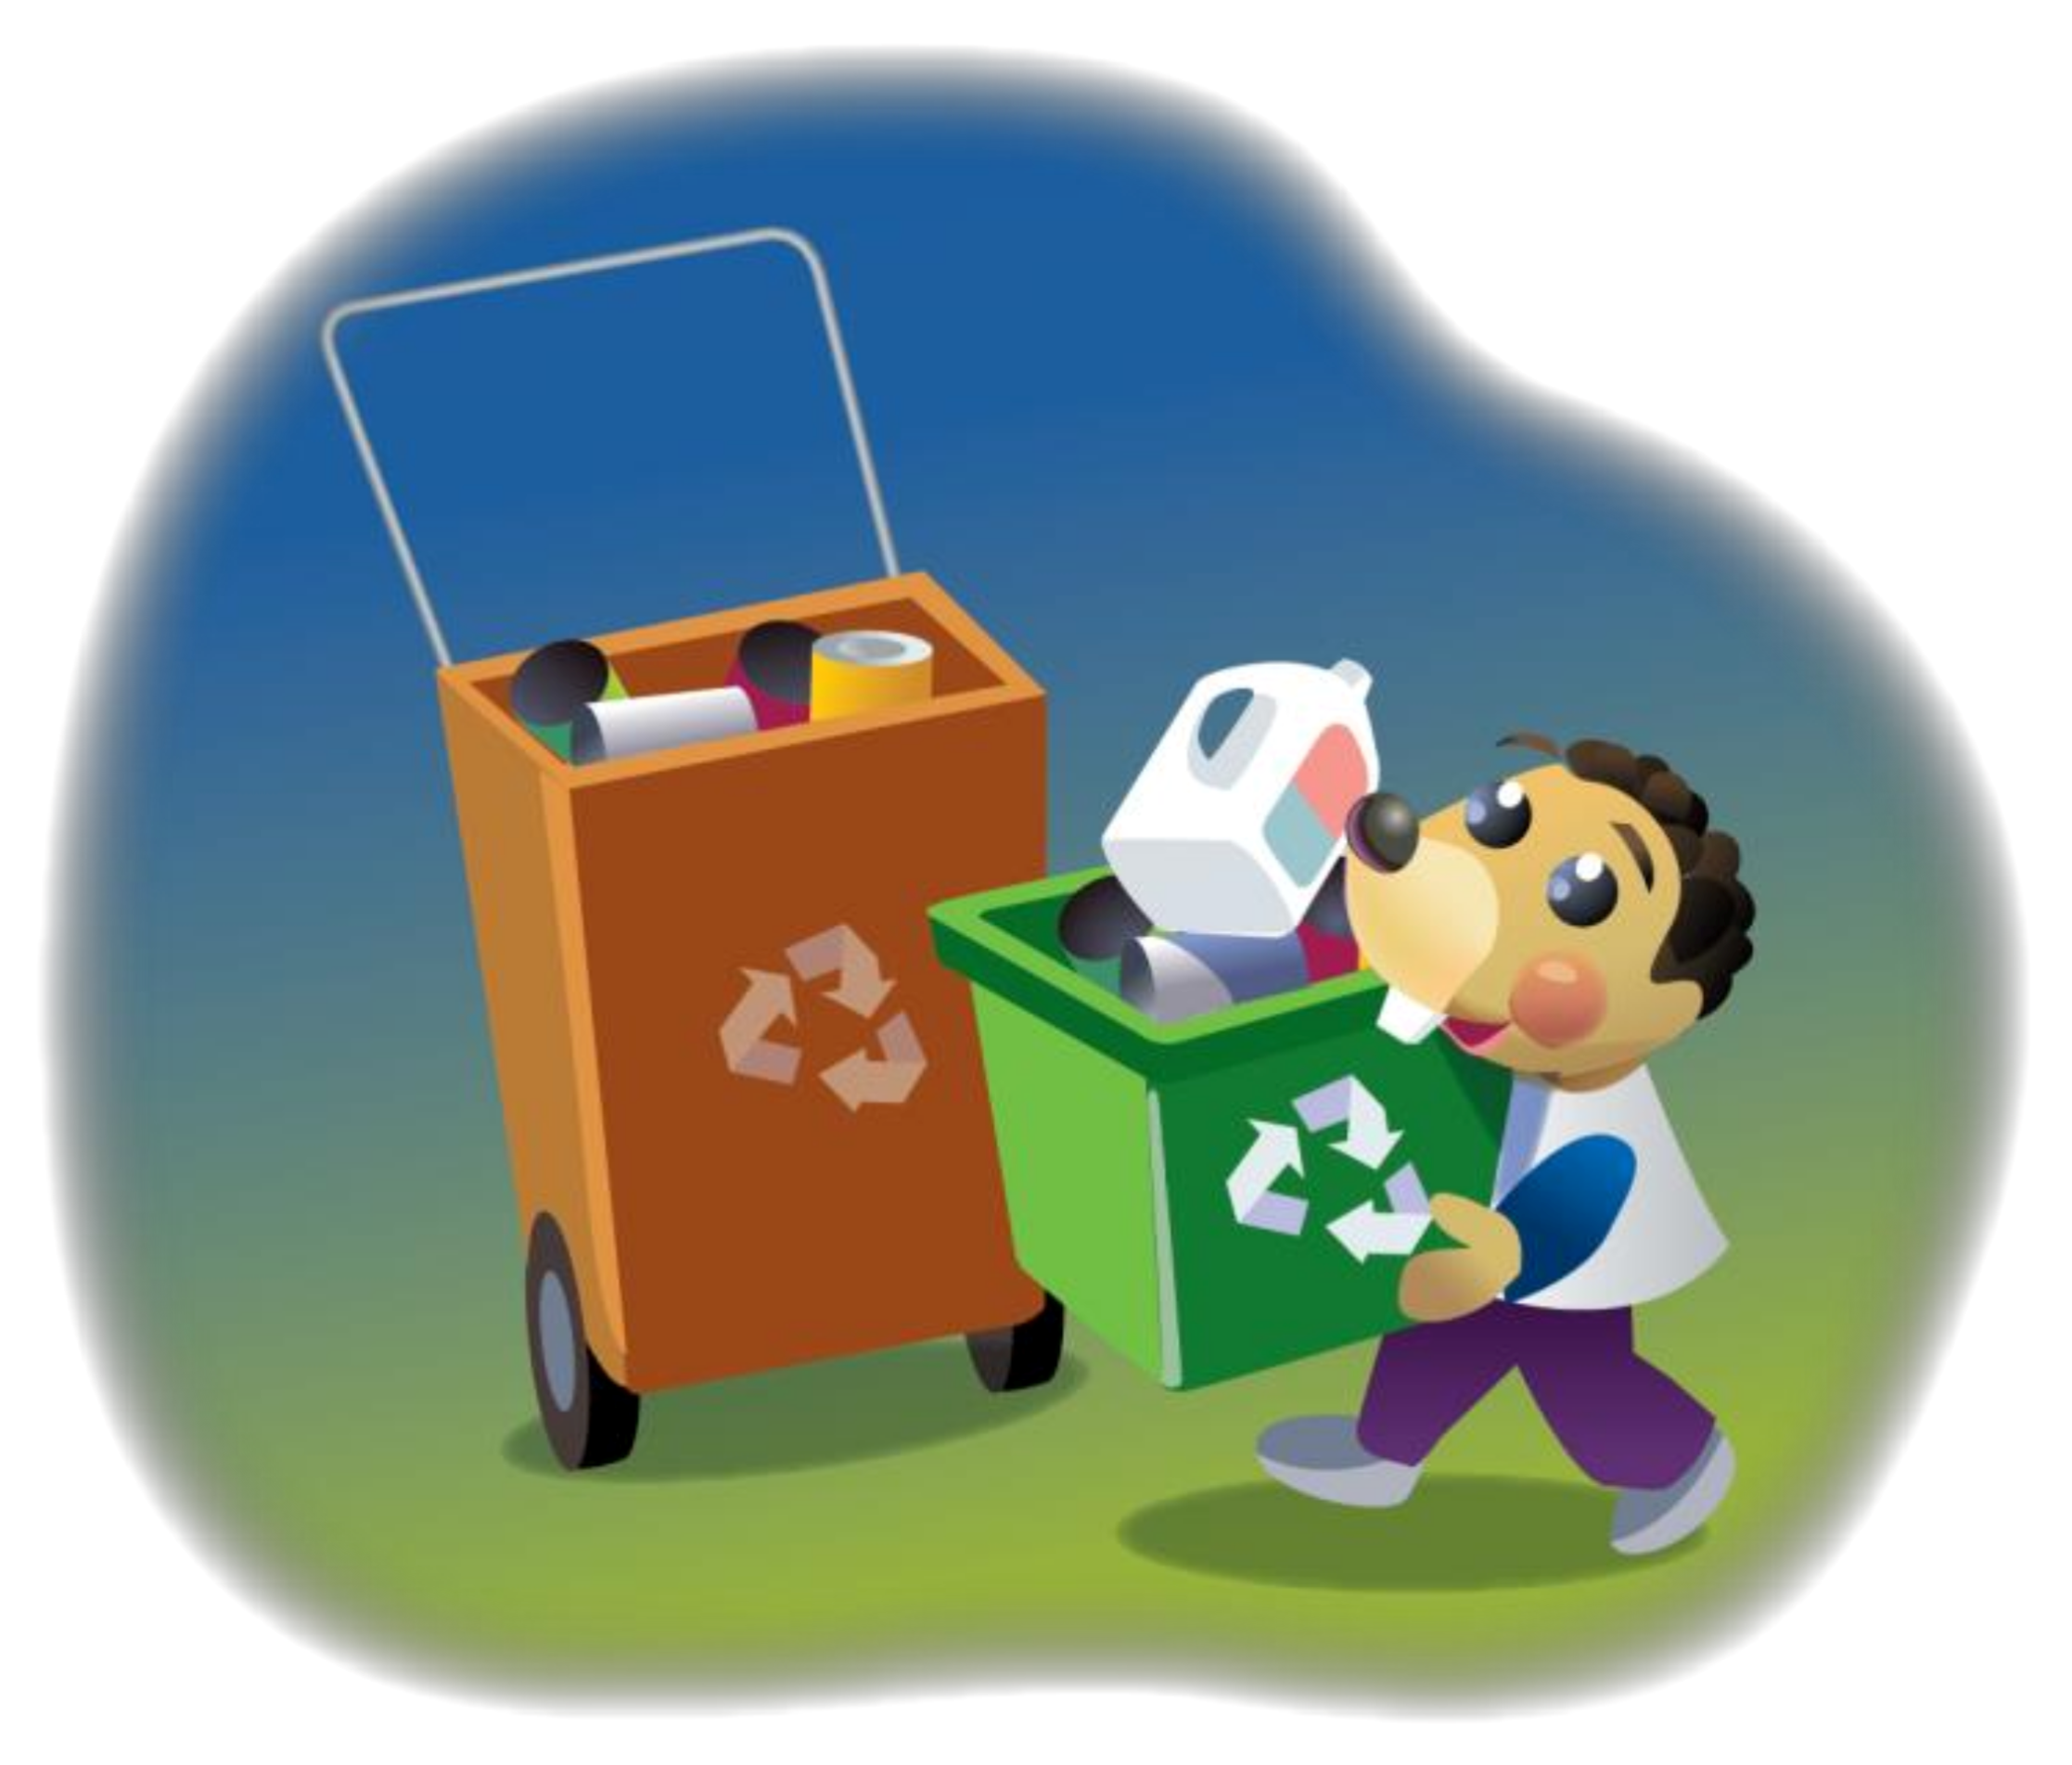 Recycling 06 00069 g004